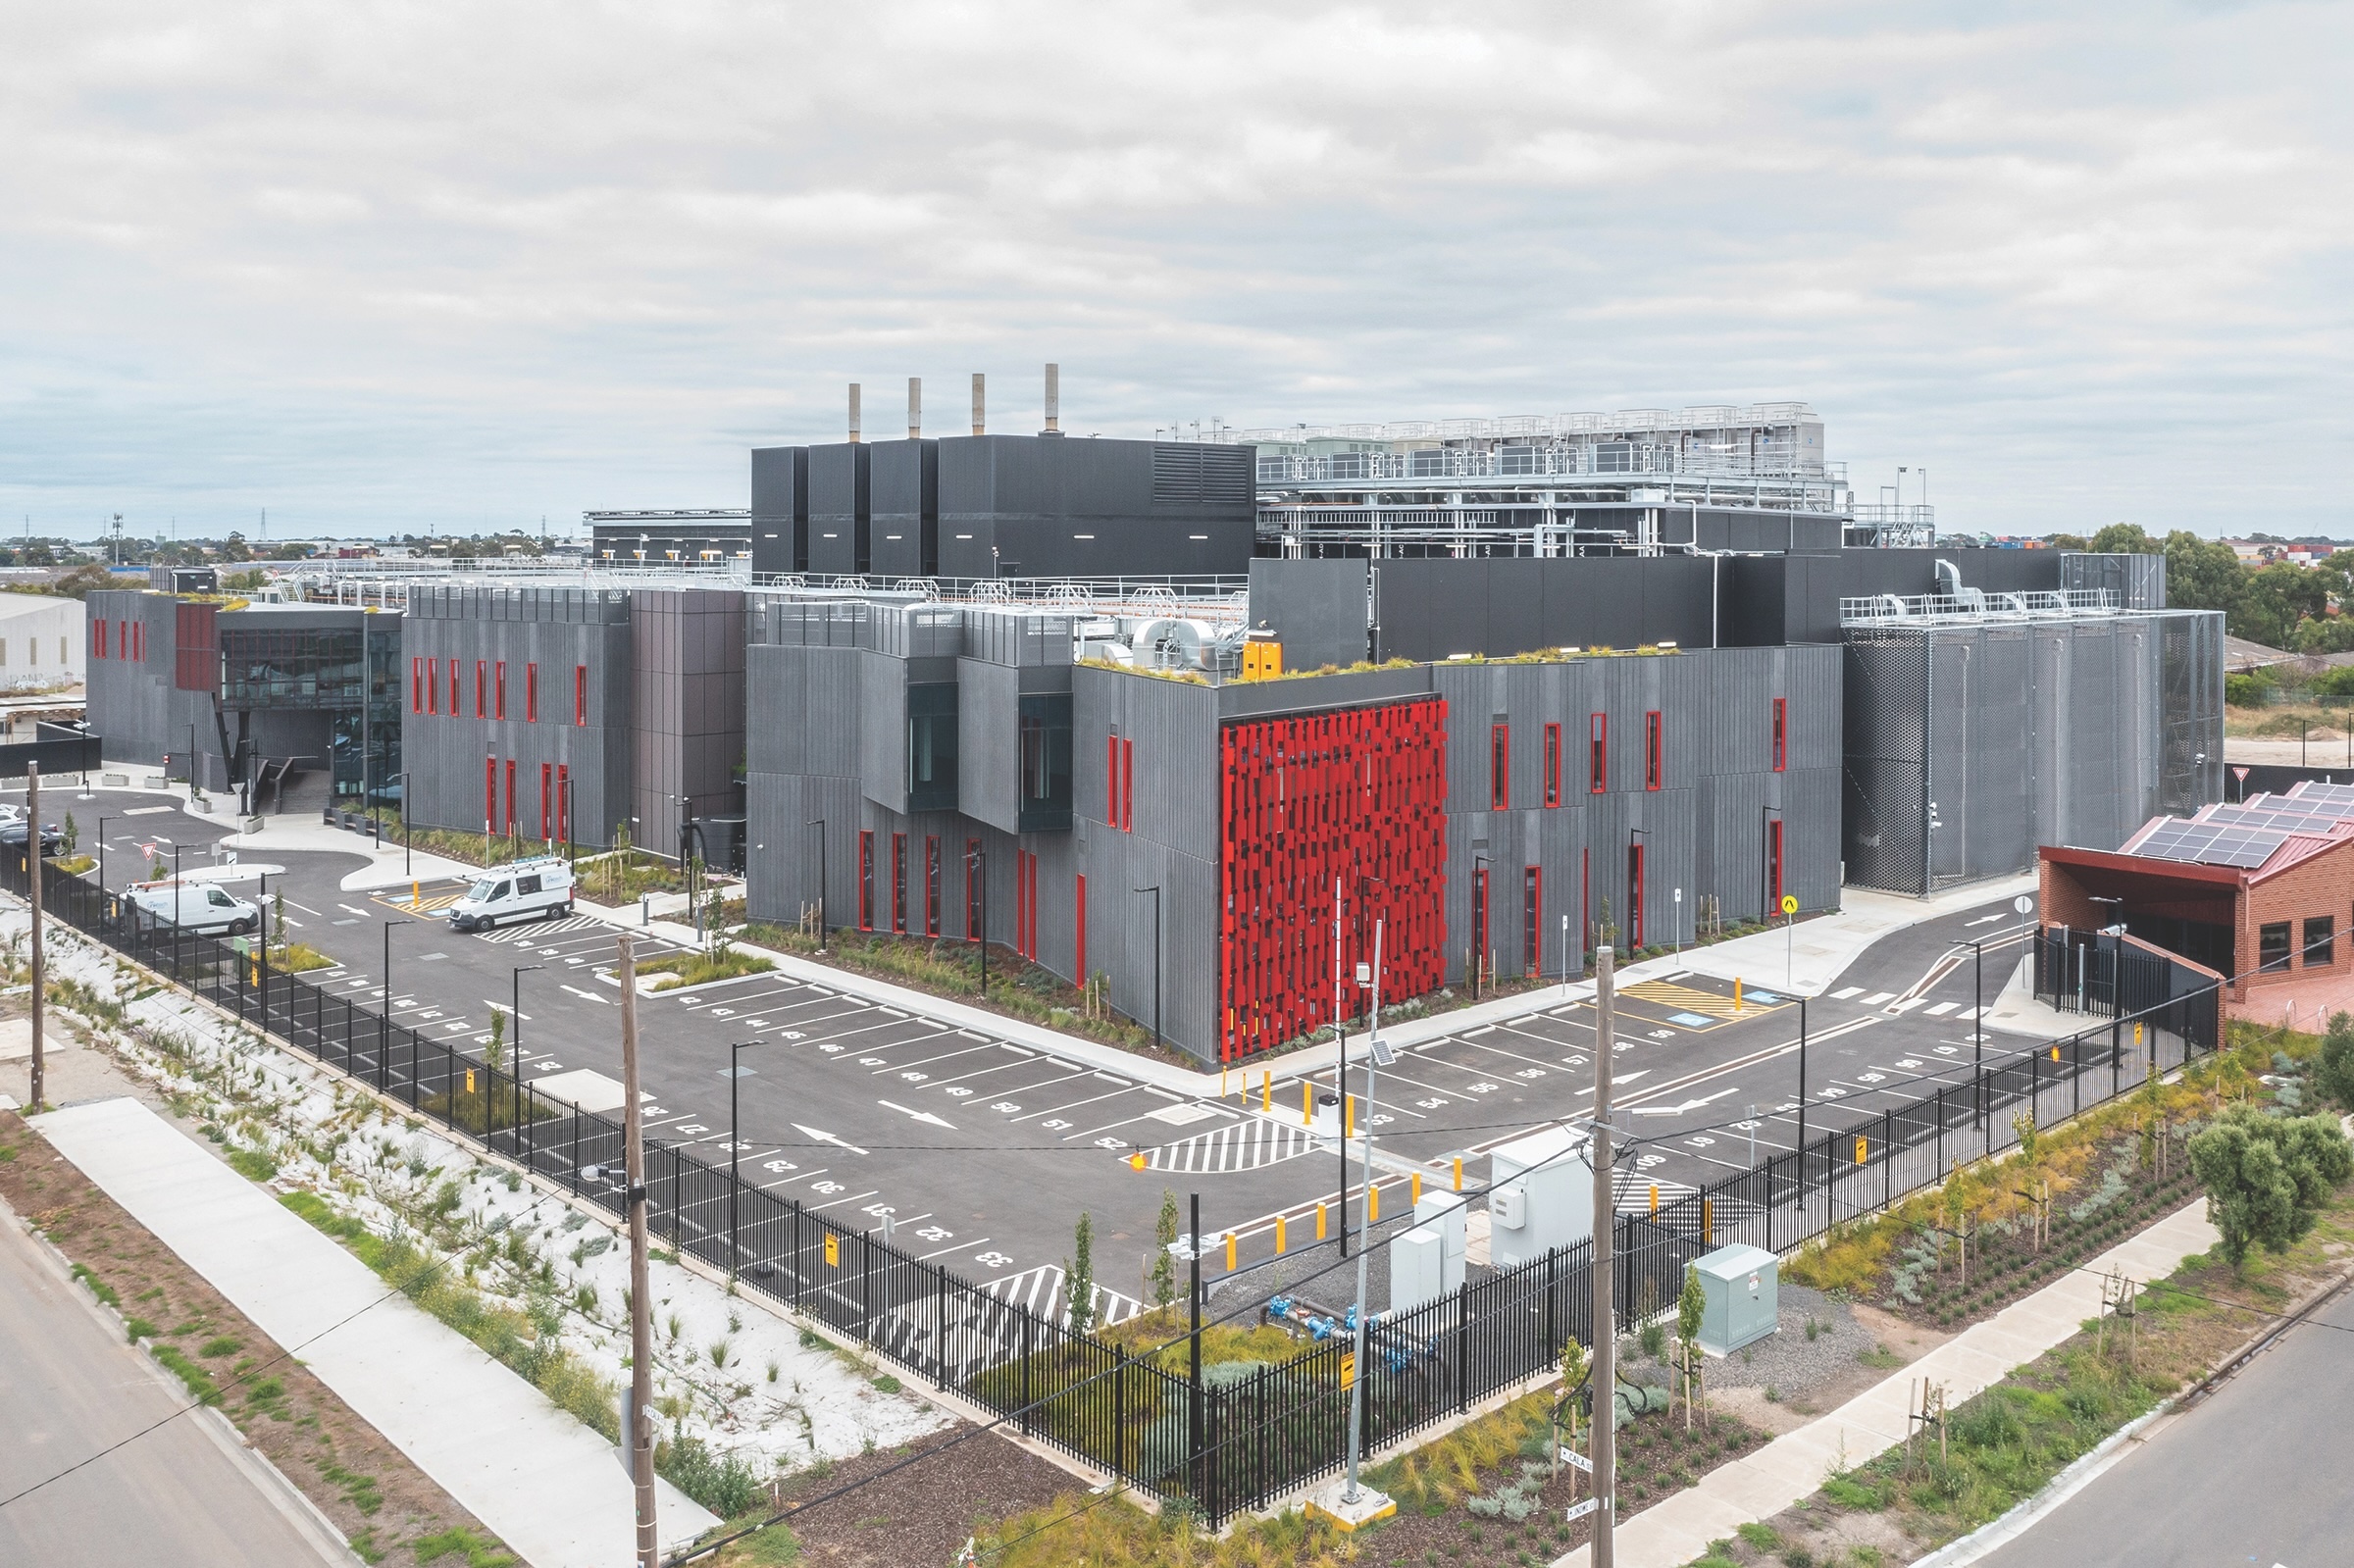 The 645,834-sf, 80-MW NEXTDC Merlot 3 data center, located in the suburb of Melbourne, Australia, designed by HDR